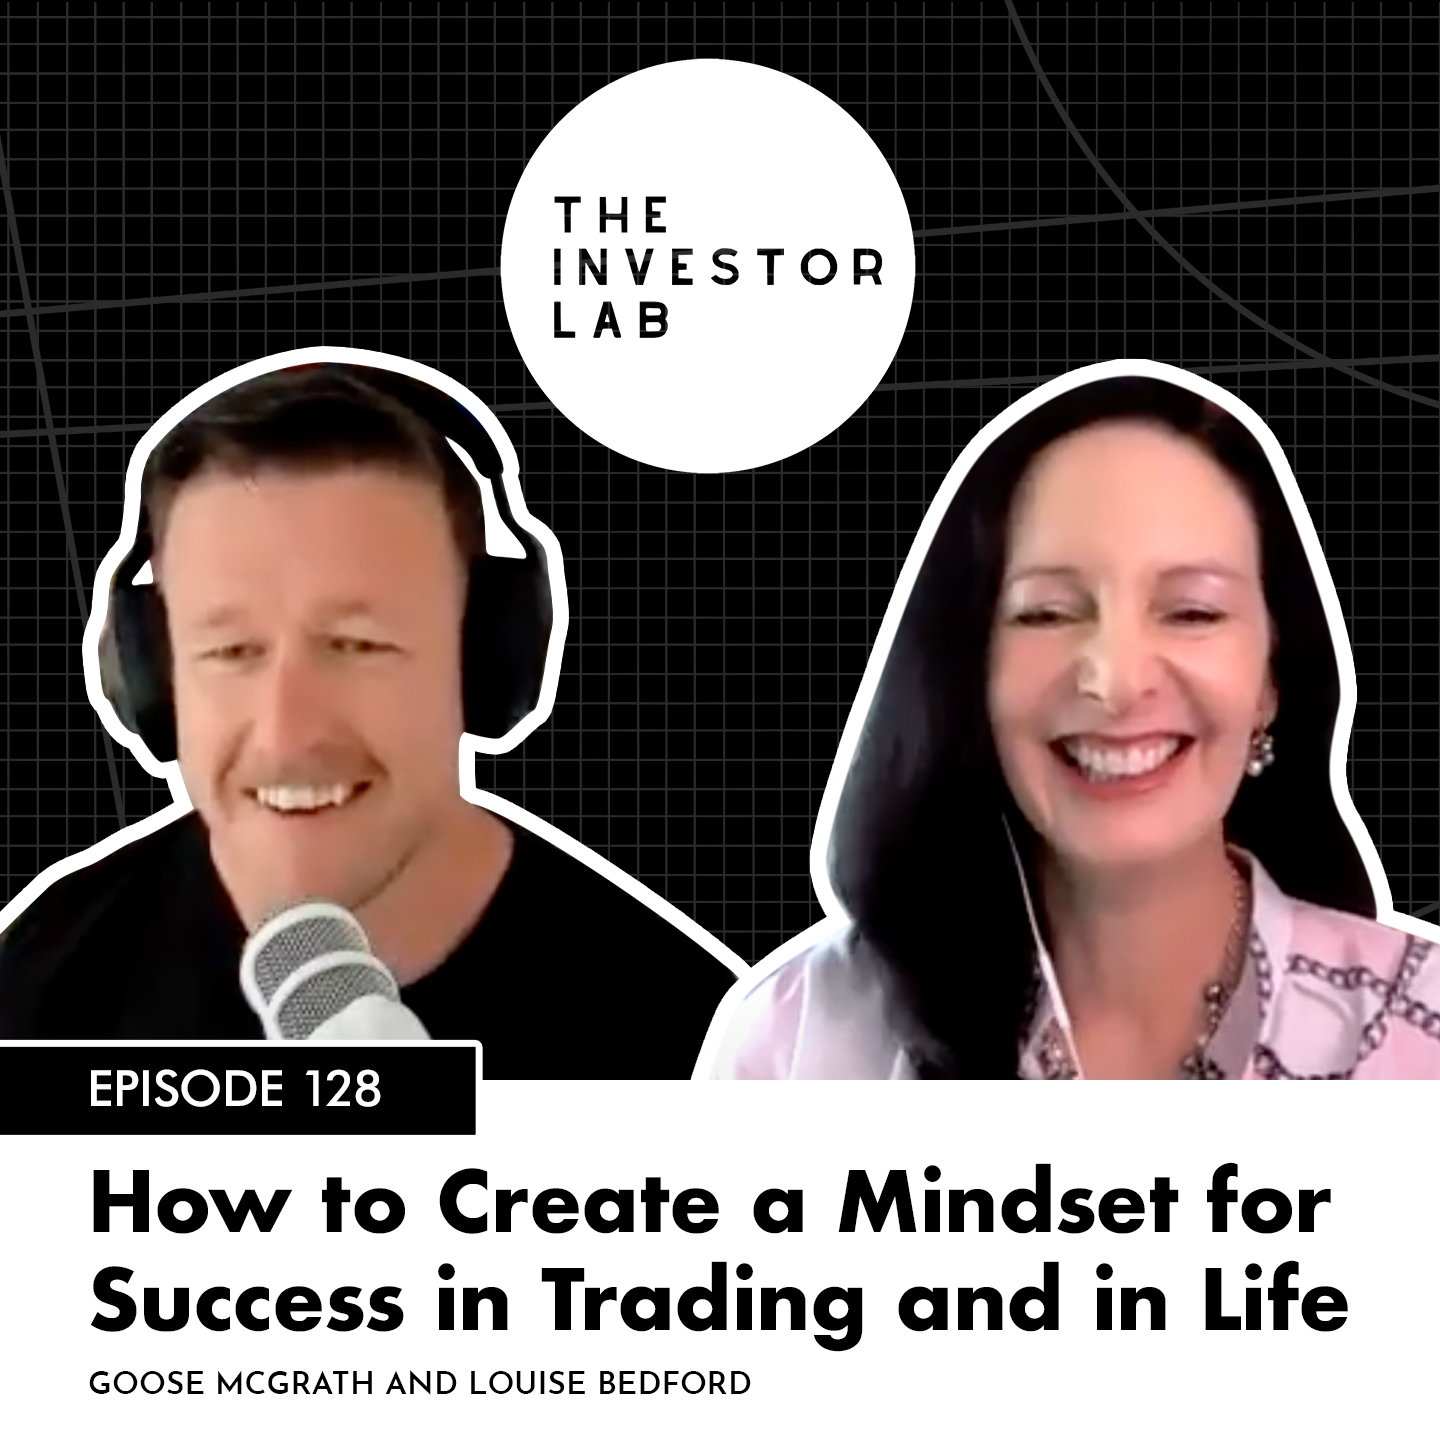 How to Create a Mindset for Success In Trading and in Life with Louise Bedford